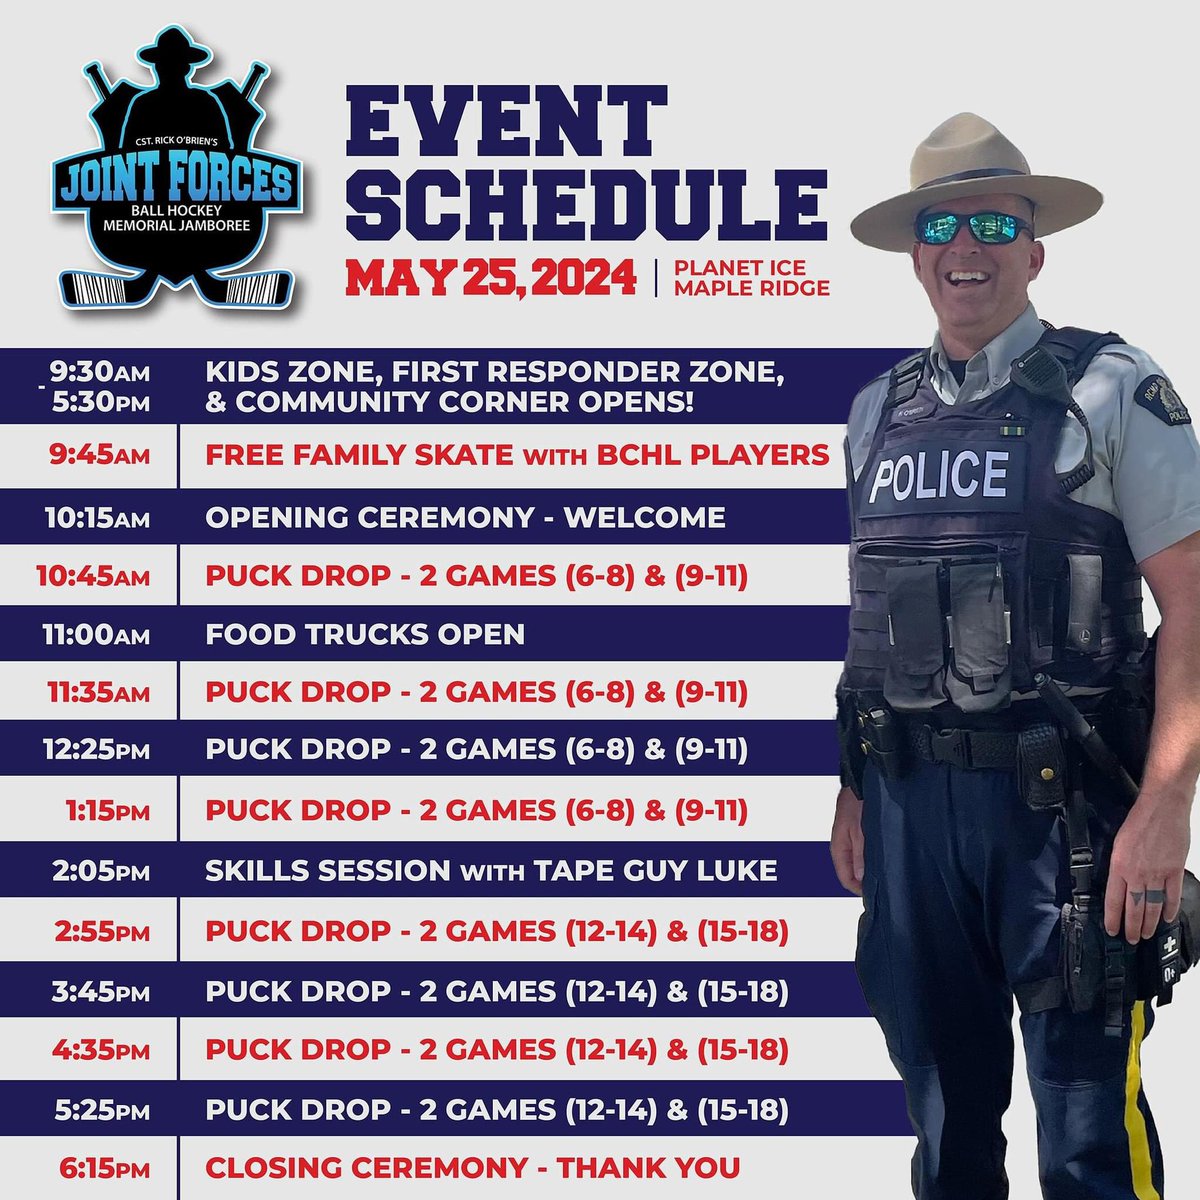 Don't want FOMO? Join us, 9:30 a.m. onwards, for a day filled with fun, community and teamwork as we honour Cst. Rick O'Brien's Legacy at the #JointForcesJamboree! This event is open to the public, you don't have to be a registered player to attend! See you there! 🏒🚨